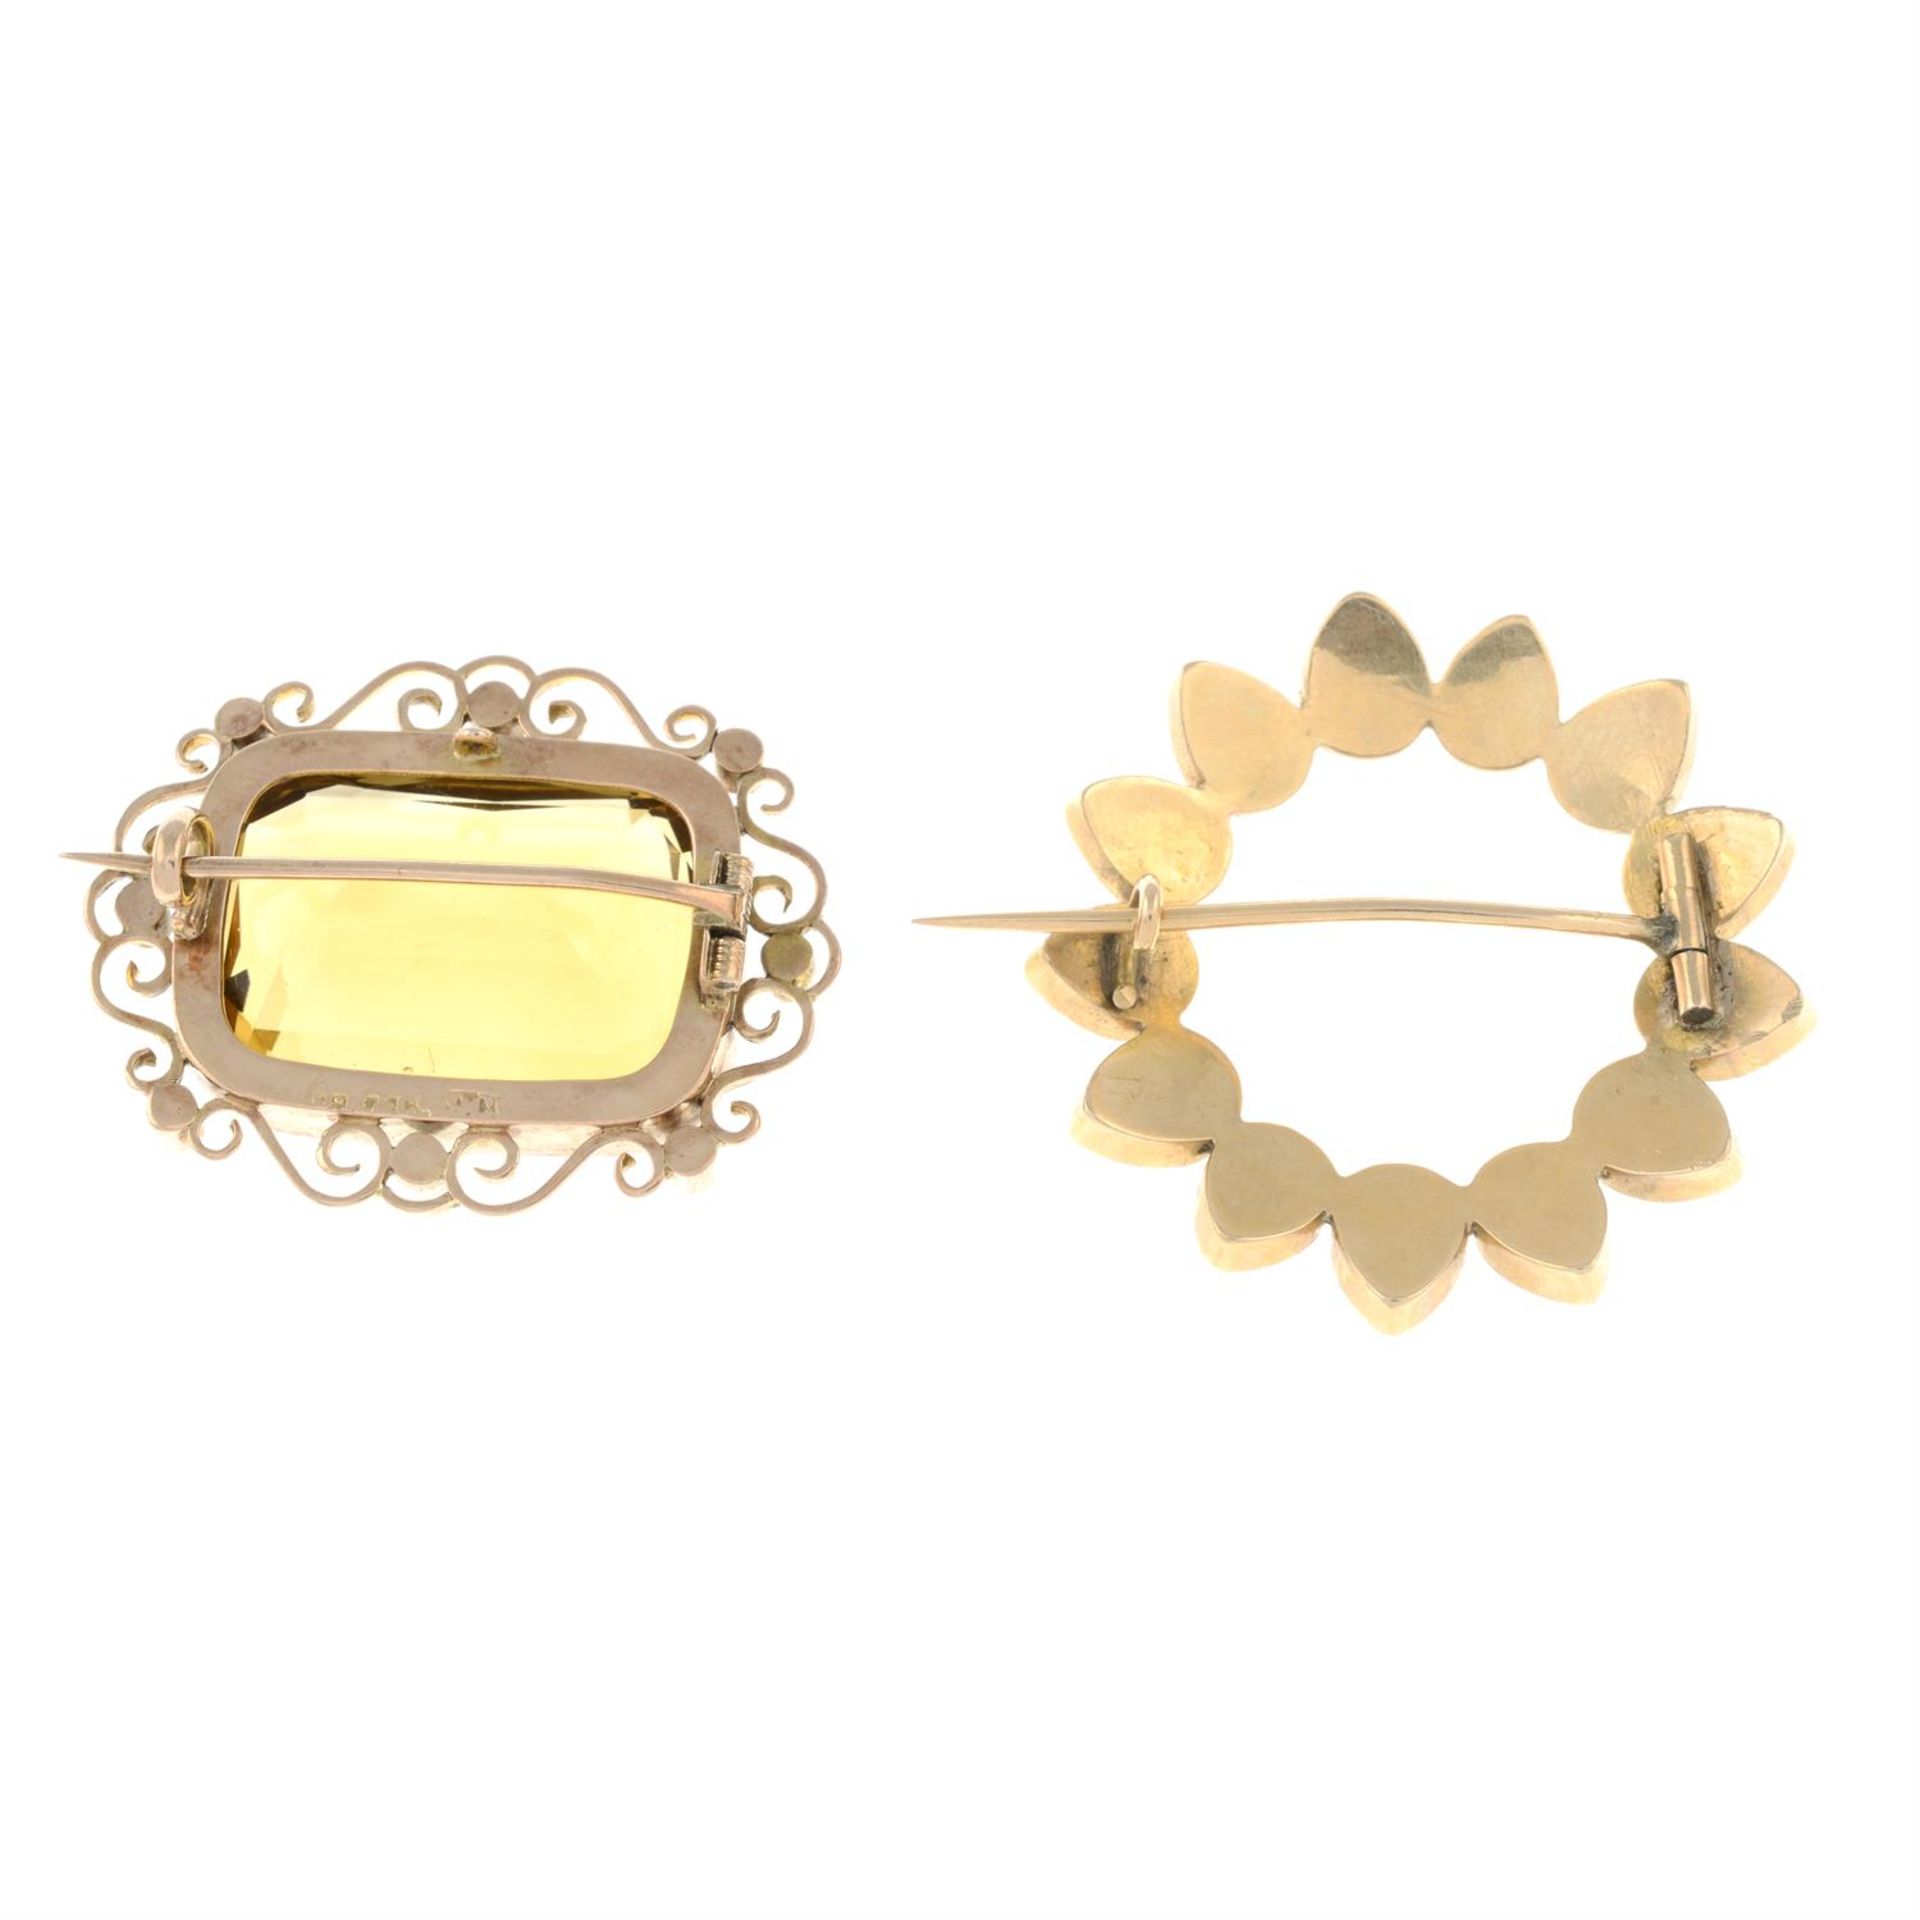 An early 20th century 9ct gold citrine and split pearl brooch together with an early 20th century - Image 2 of 2